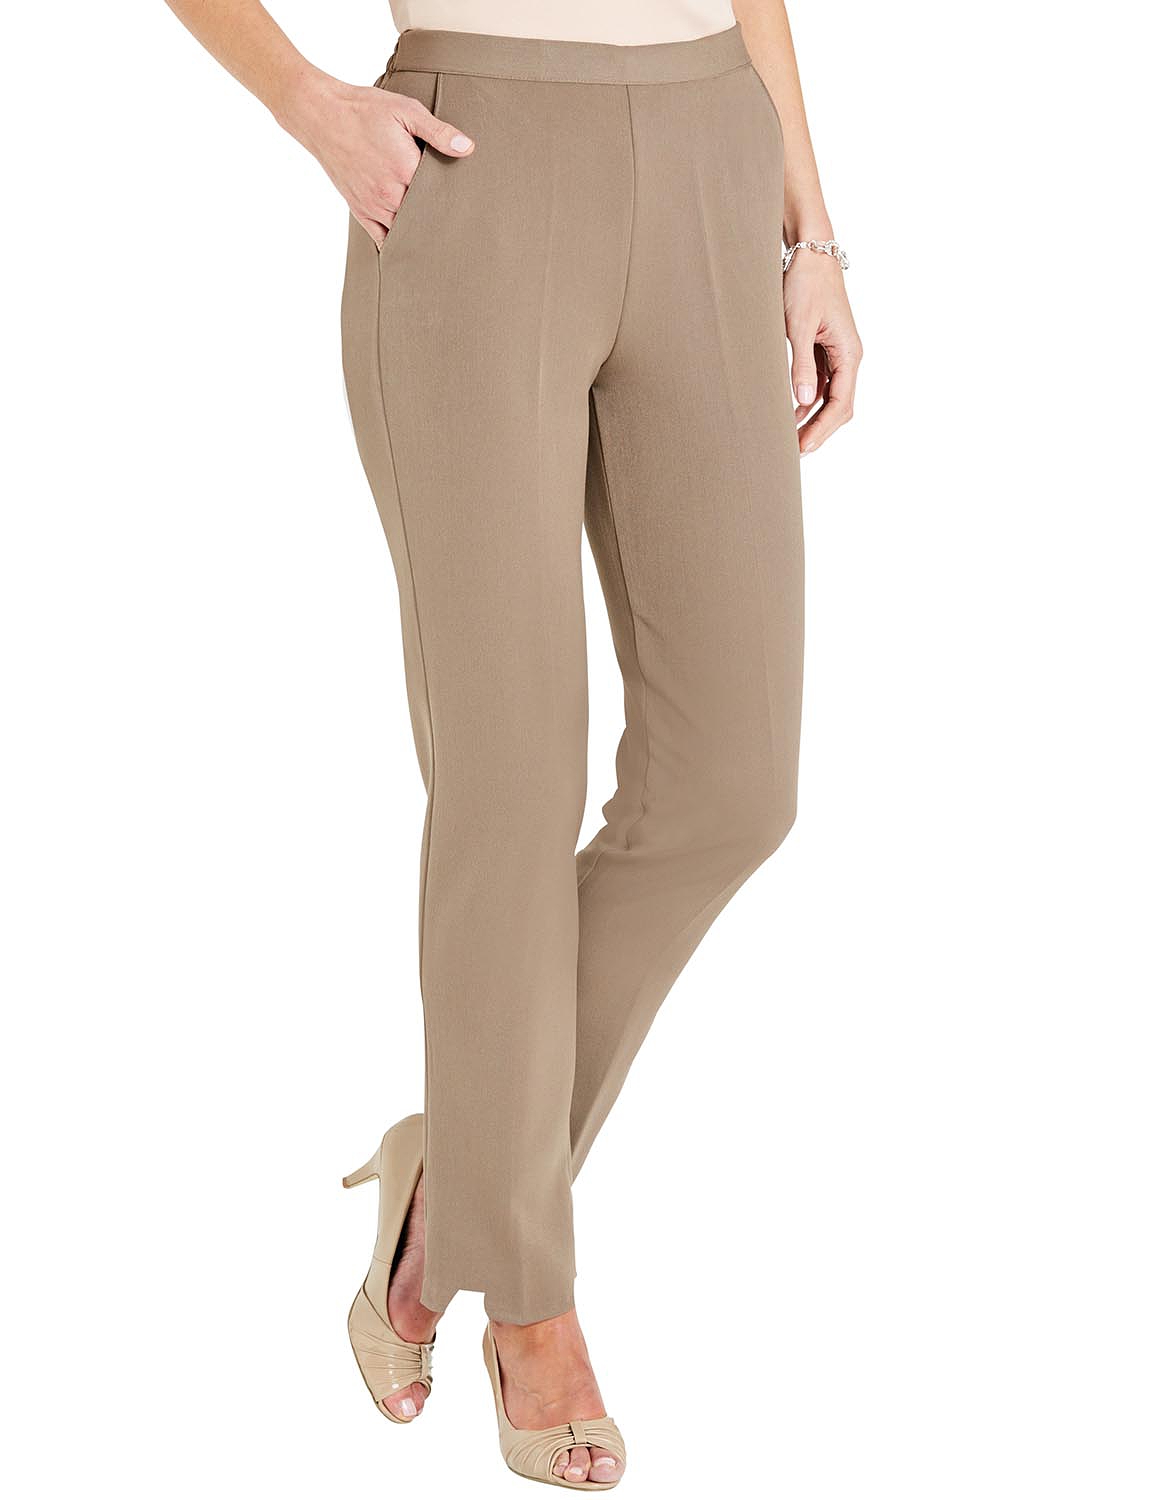 Ladies 2-Way Stretch Trouser | Chums